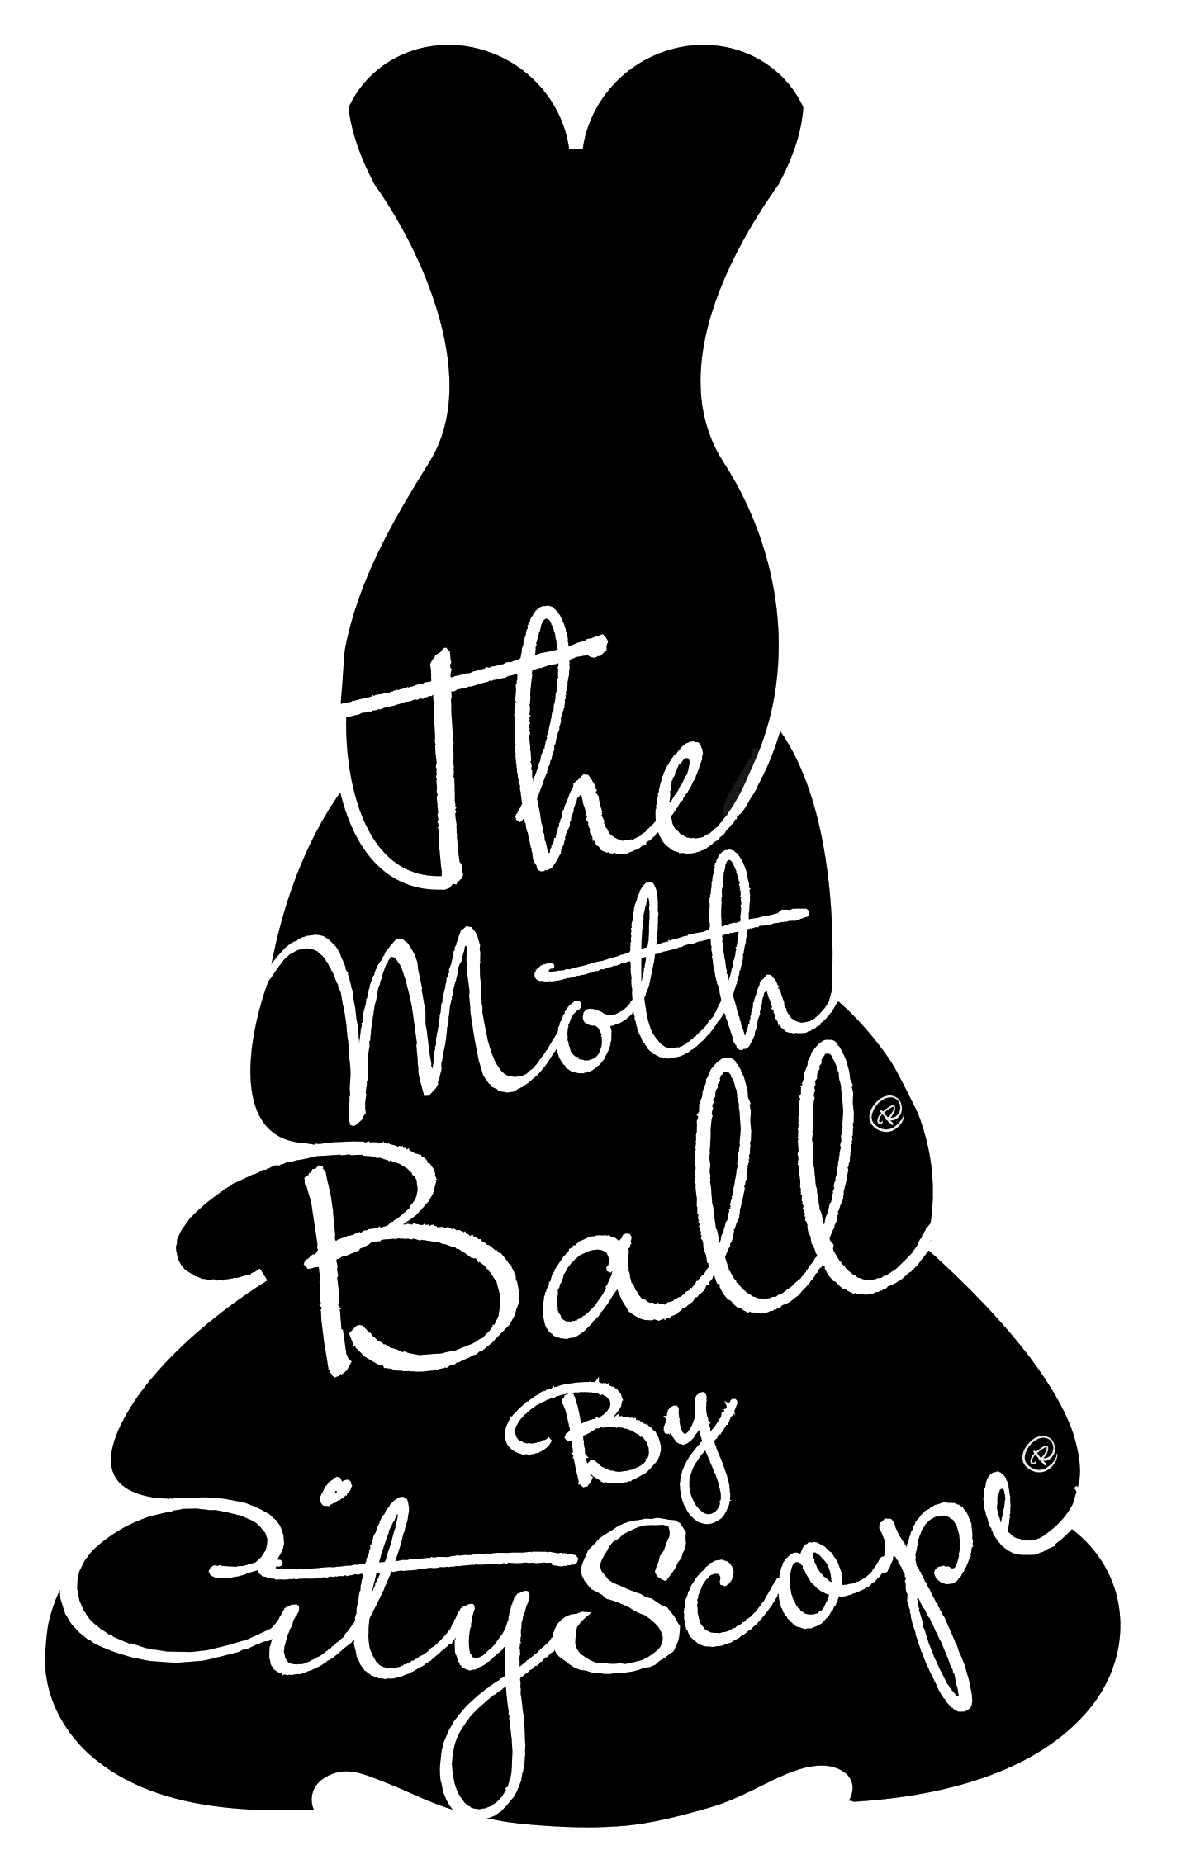 The Moth Ball: An Event For Women, About Women, To Benefit Women